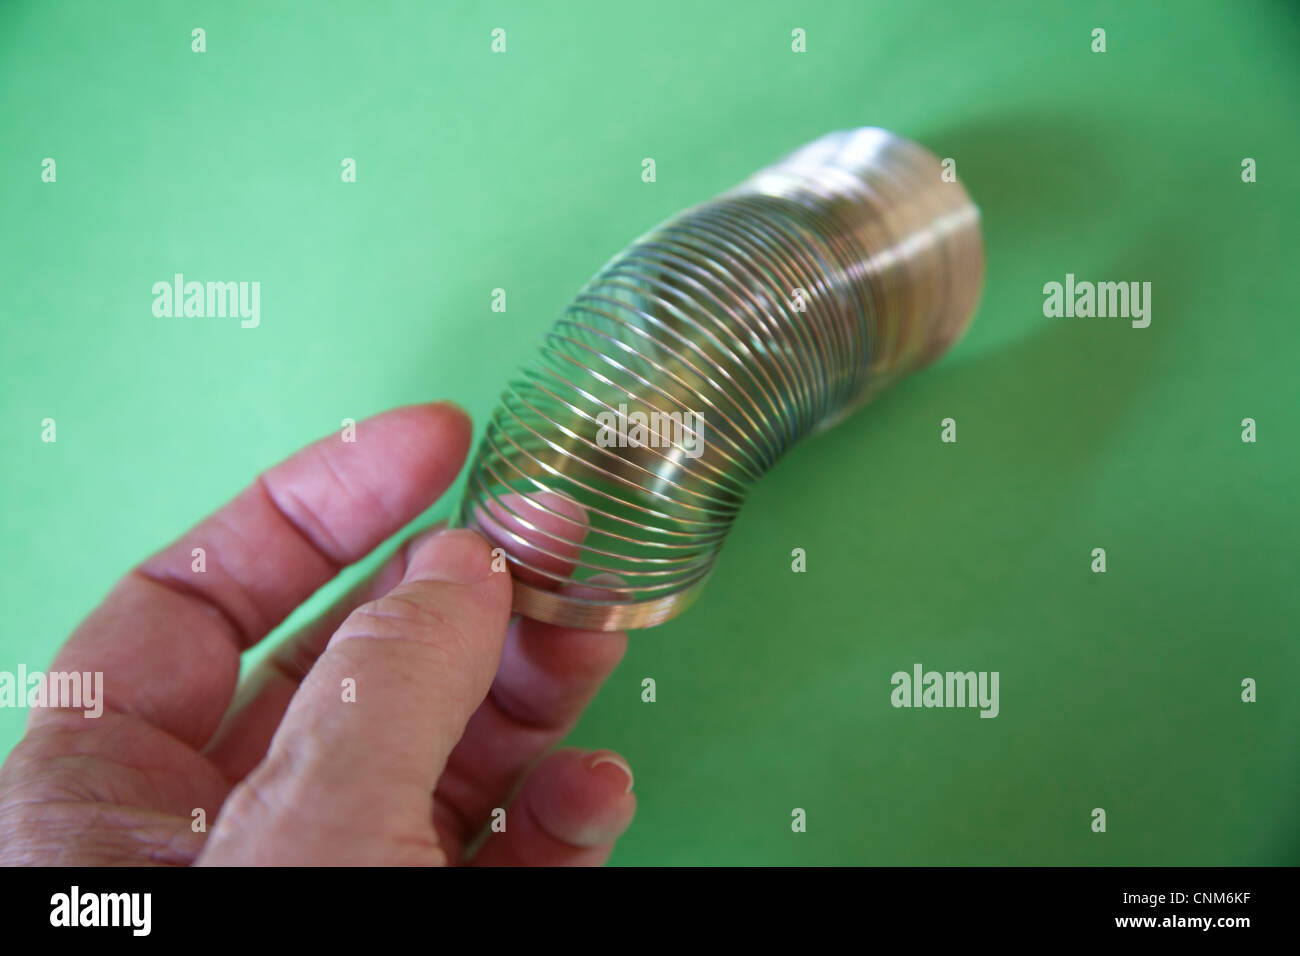 Hand moving Slinky or Lazy Spring toy made of a helical spring that stretches and can bounce up and down Stock Photo